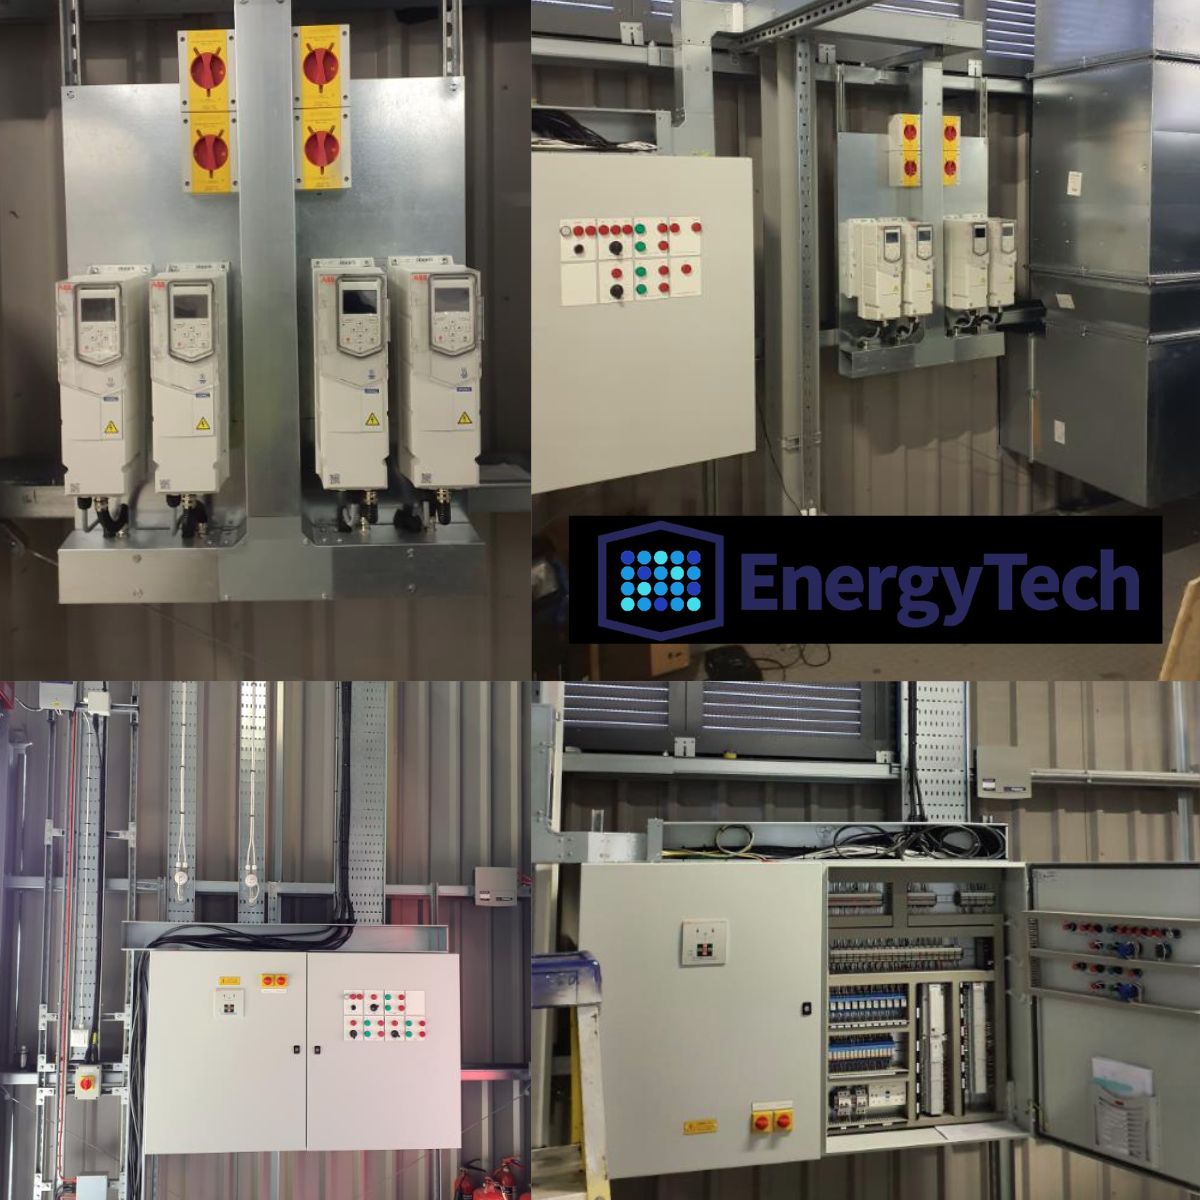 Here's some of our recent electrical works at a local hospital. 

If you want to find out more about our services head to our website👉
zurl.co/enjf 

#electrician #electricalengineering #hospital